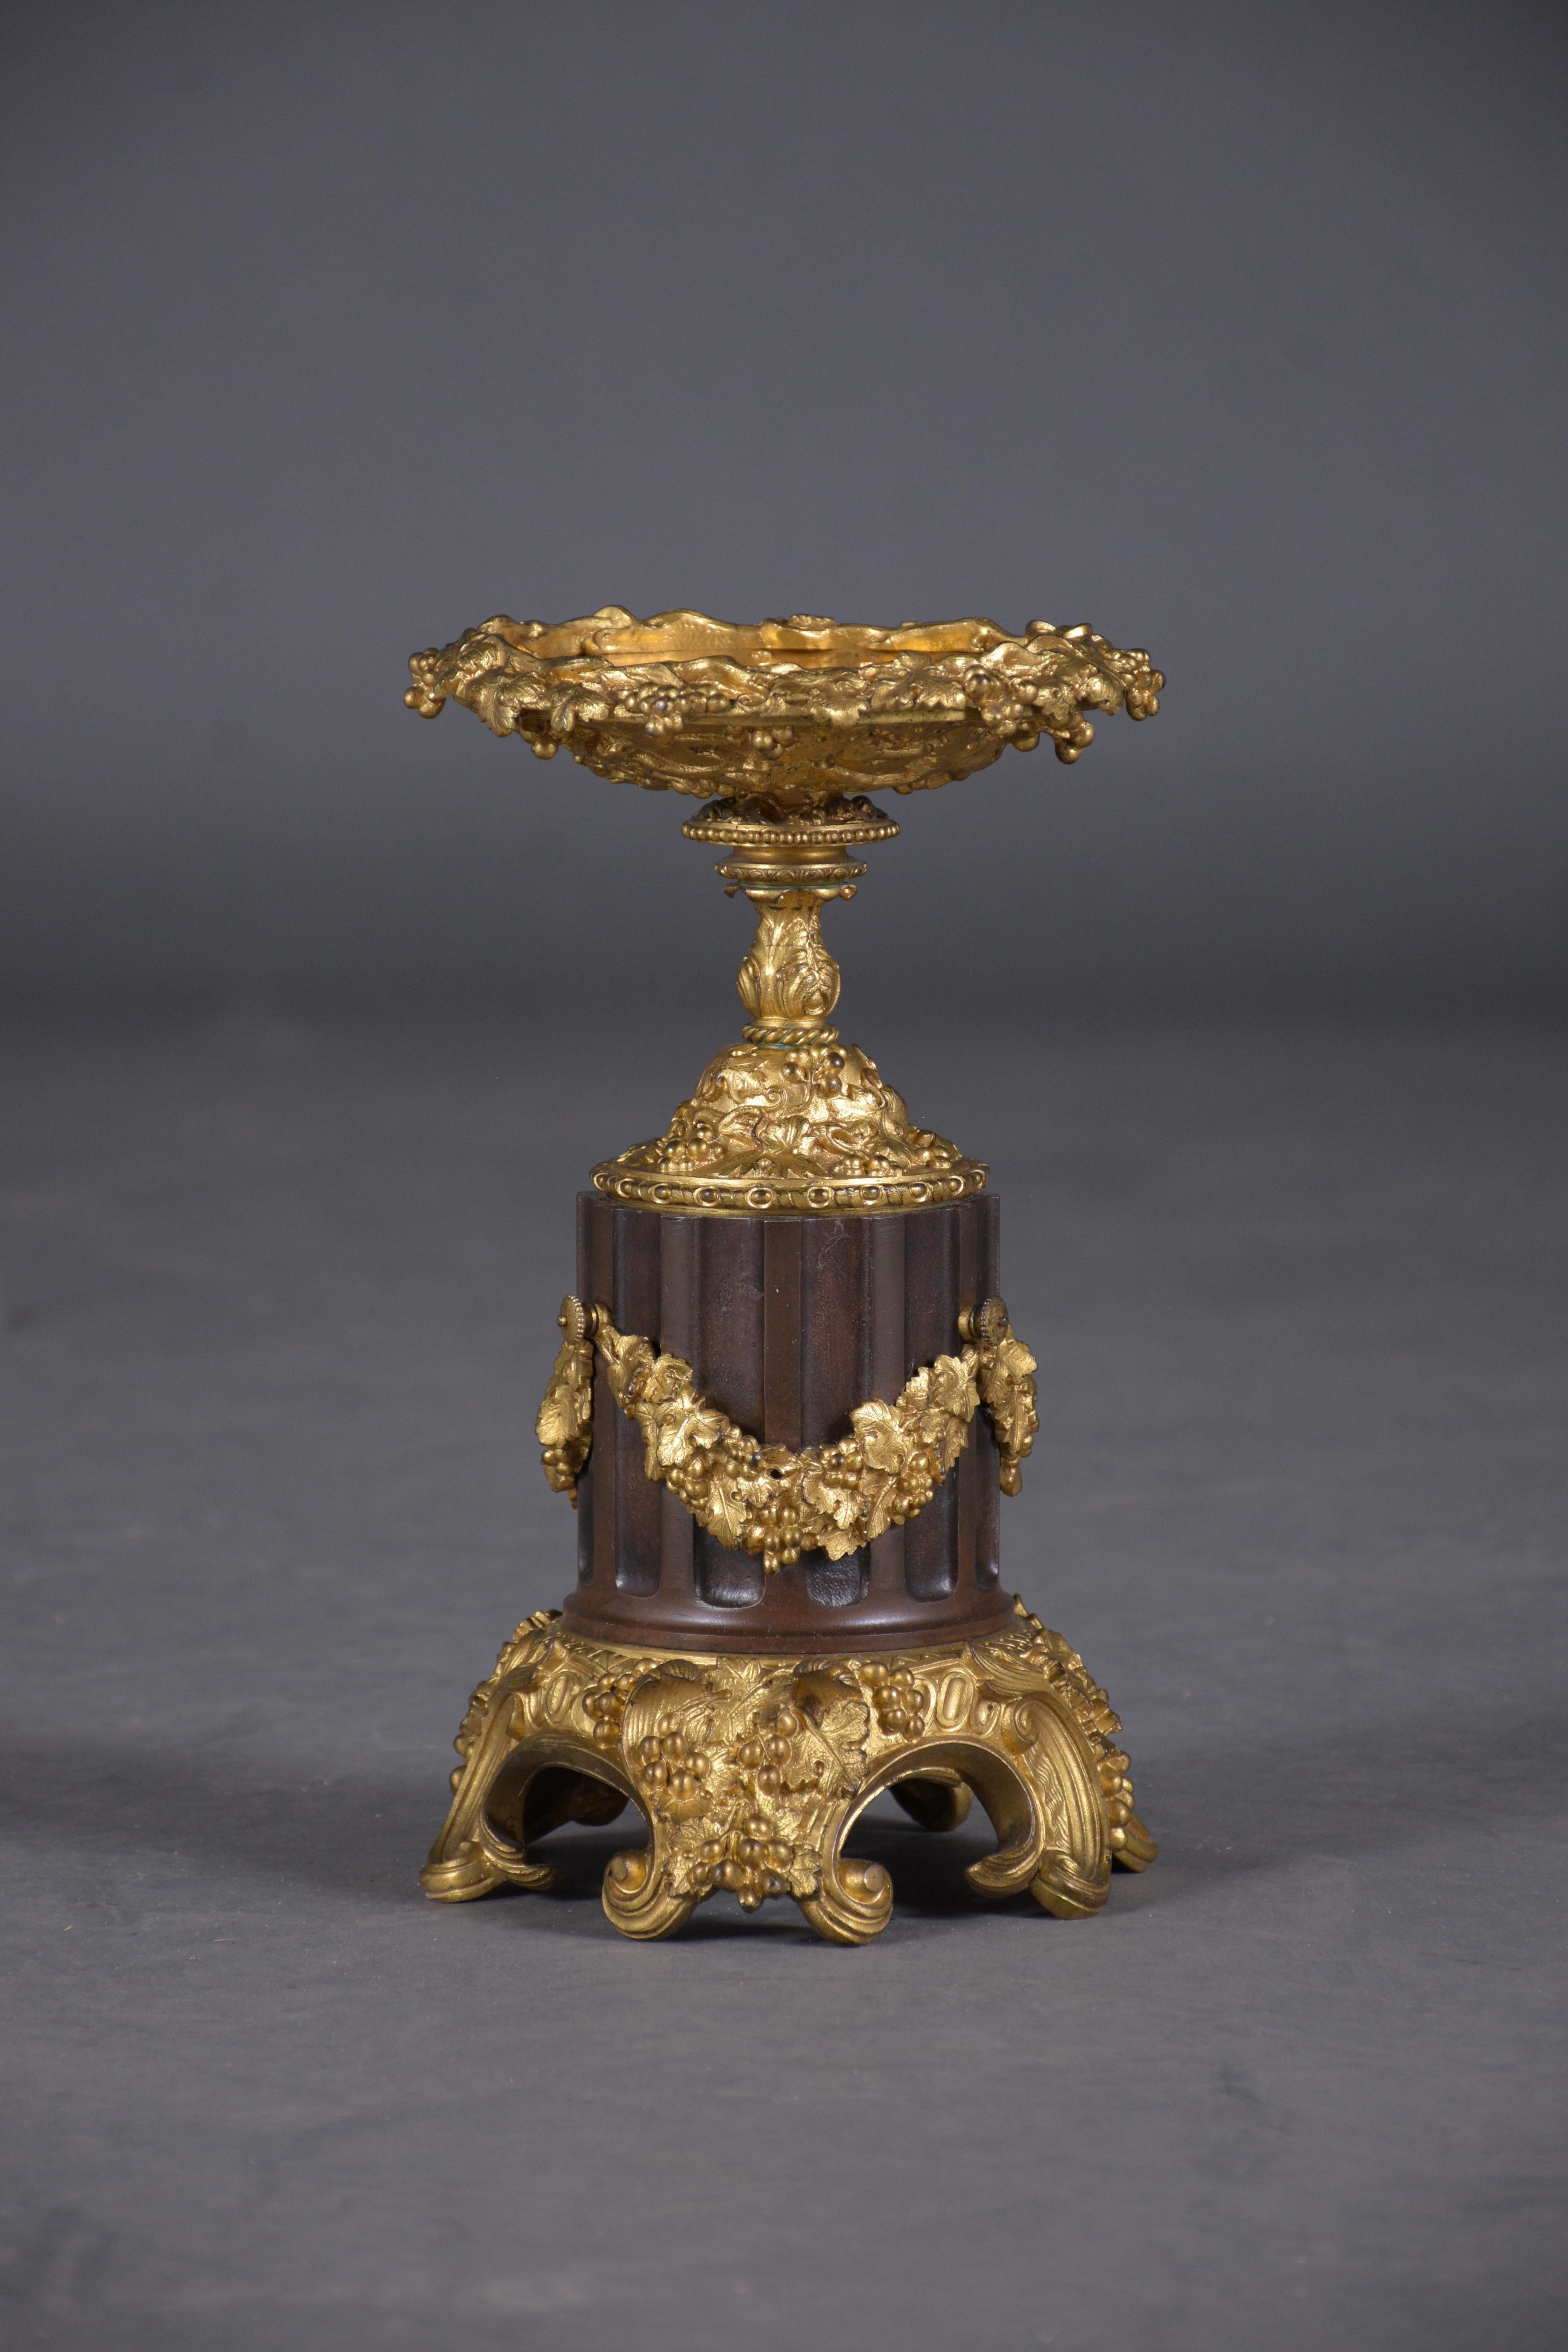 Wood Elegant 19th-Century French Bronzed Urns with Gold Ormolu Details